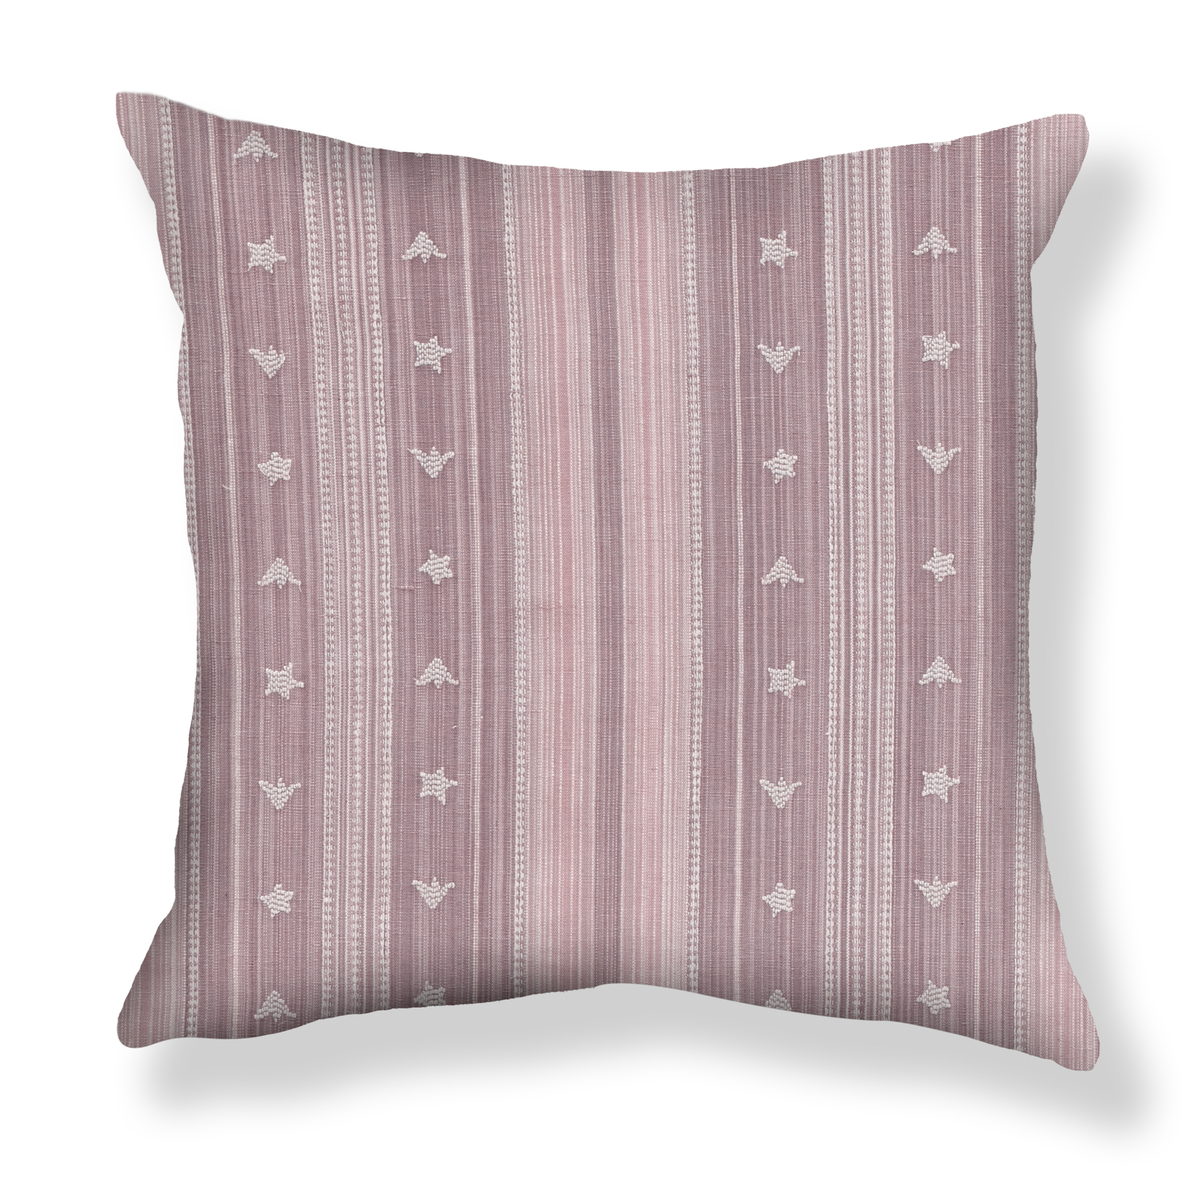 Budding Stripe Pillow in Lilac